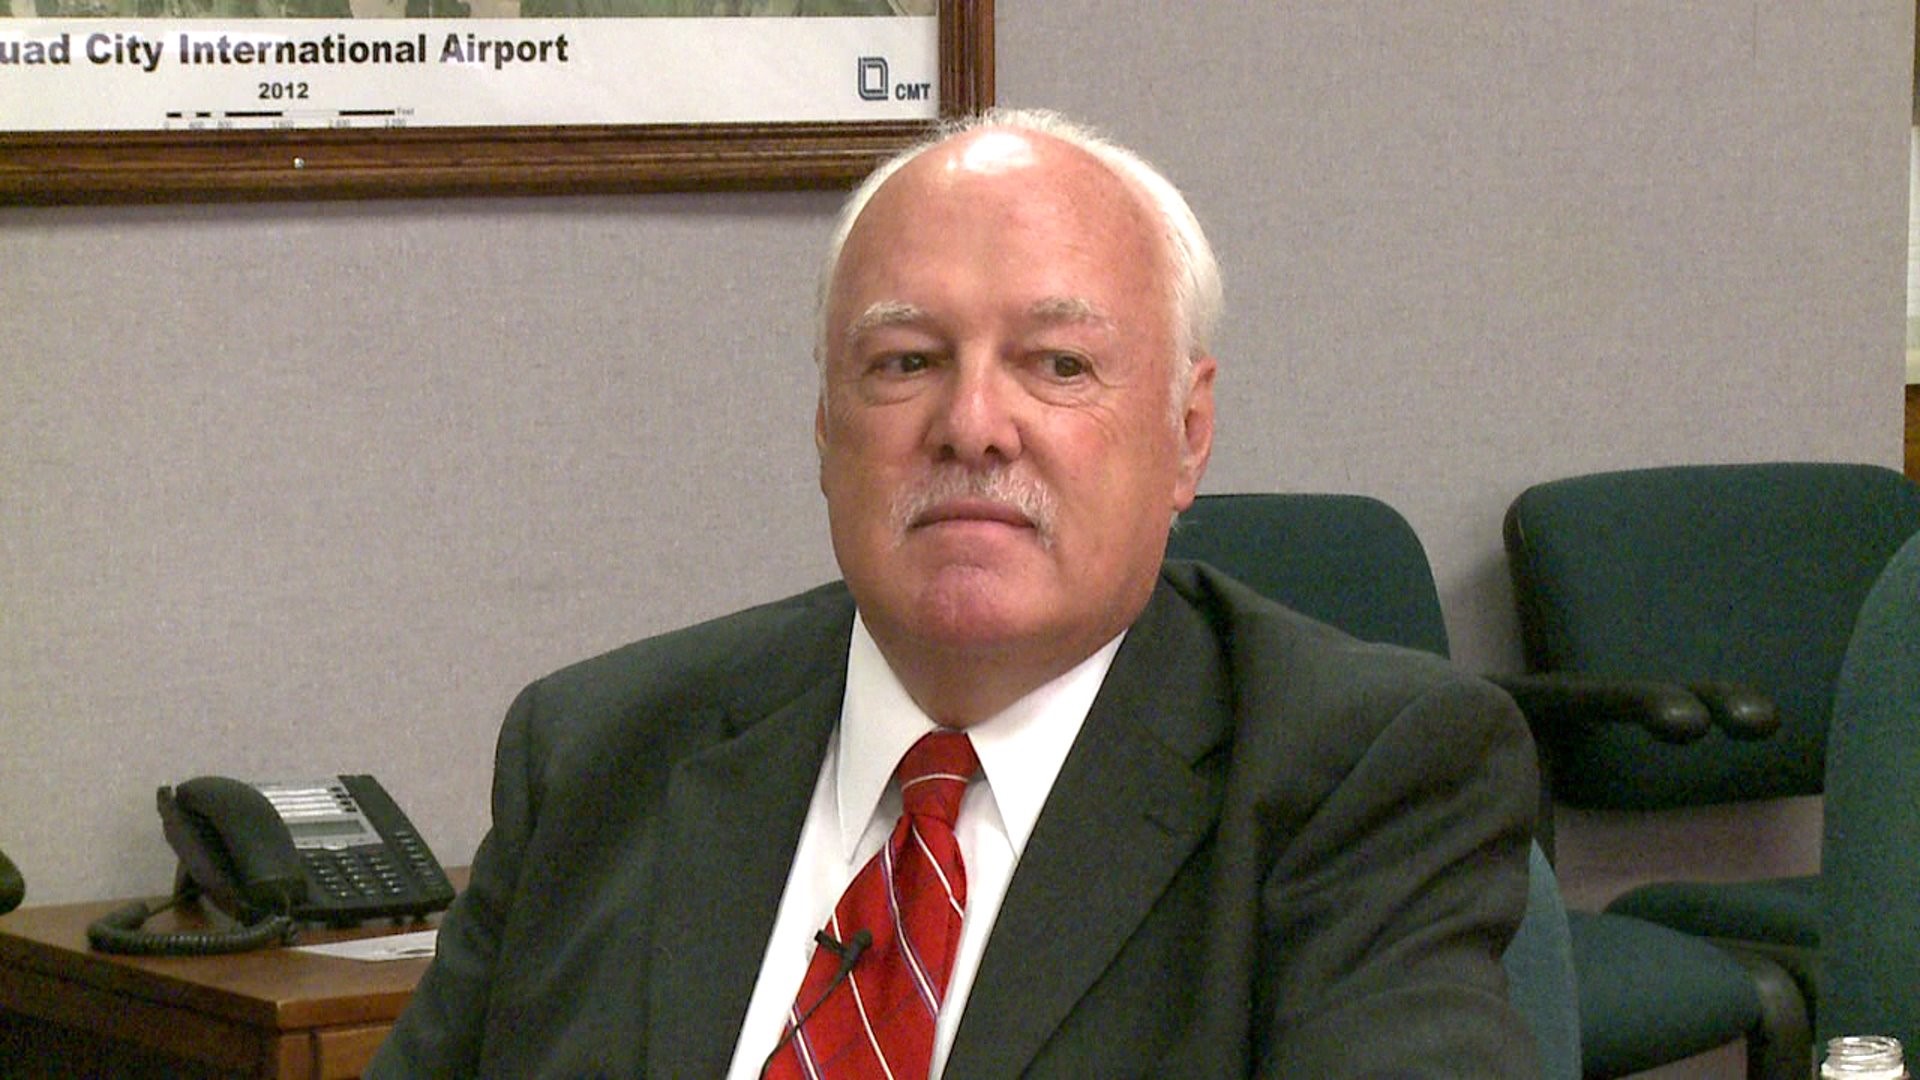 Extended Web Interview With the Quad City International Airport`s Director